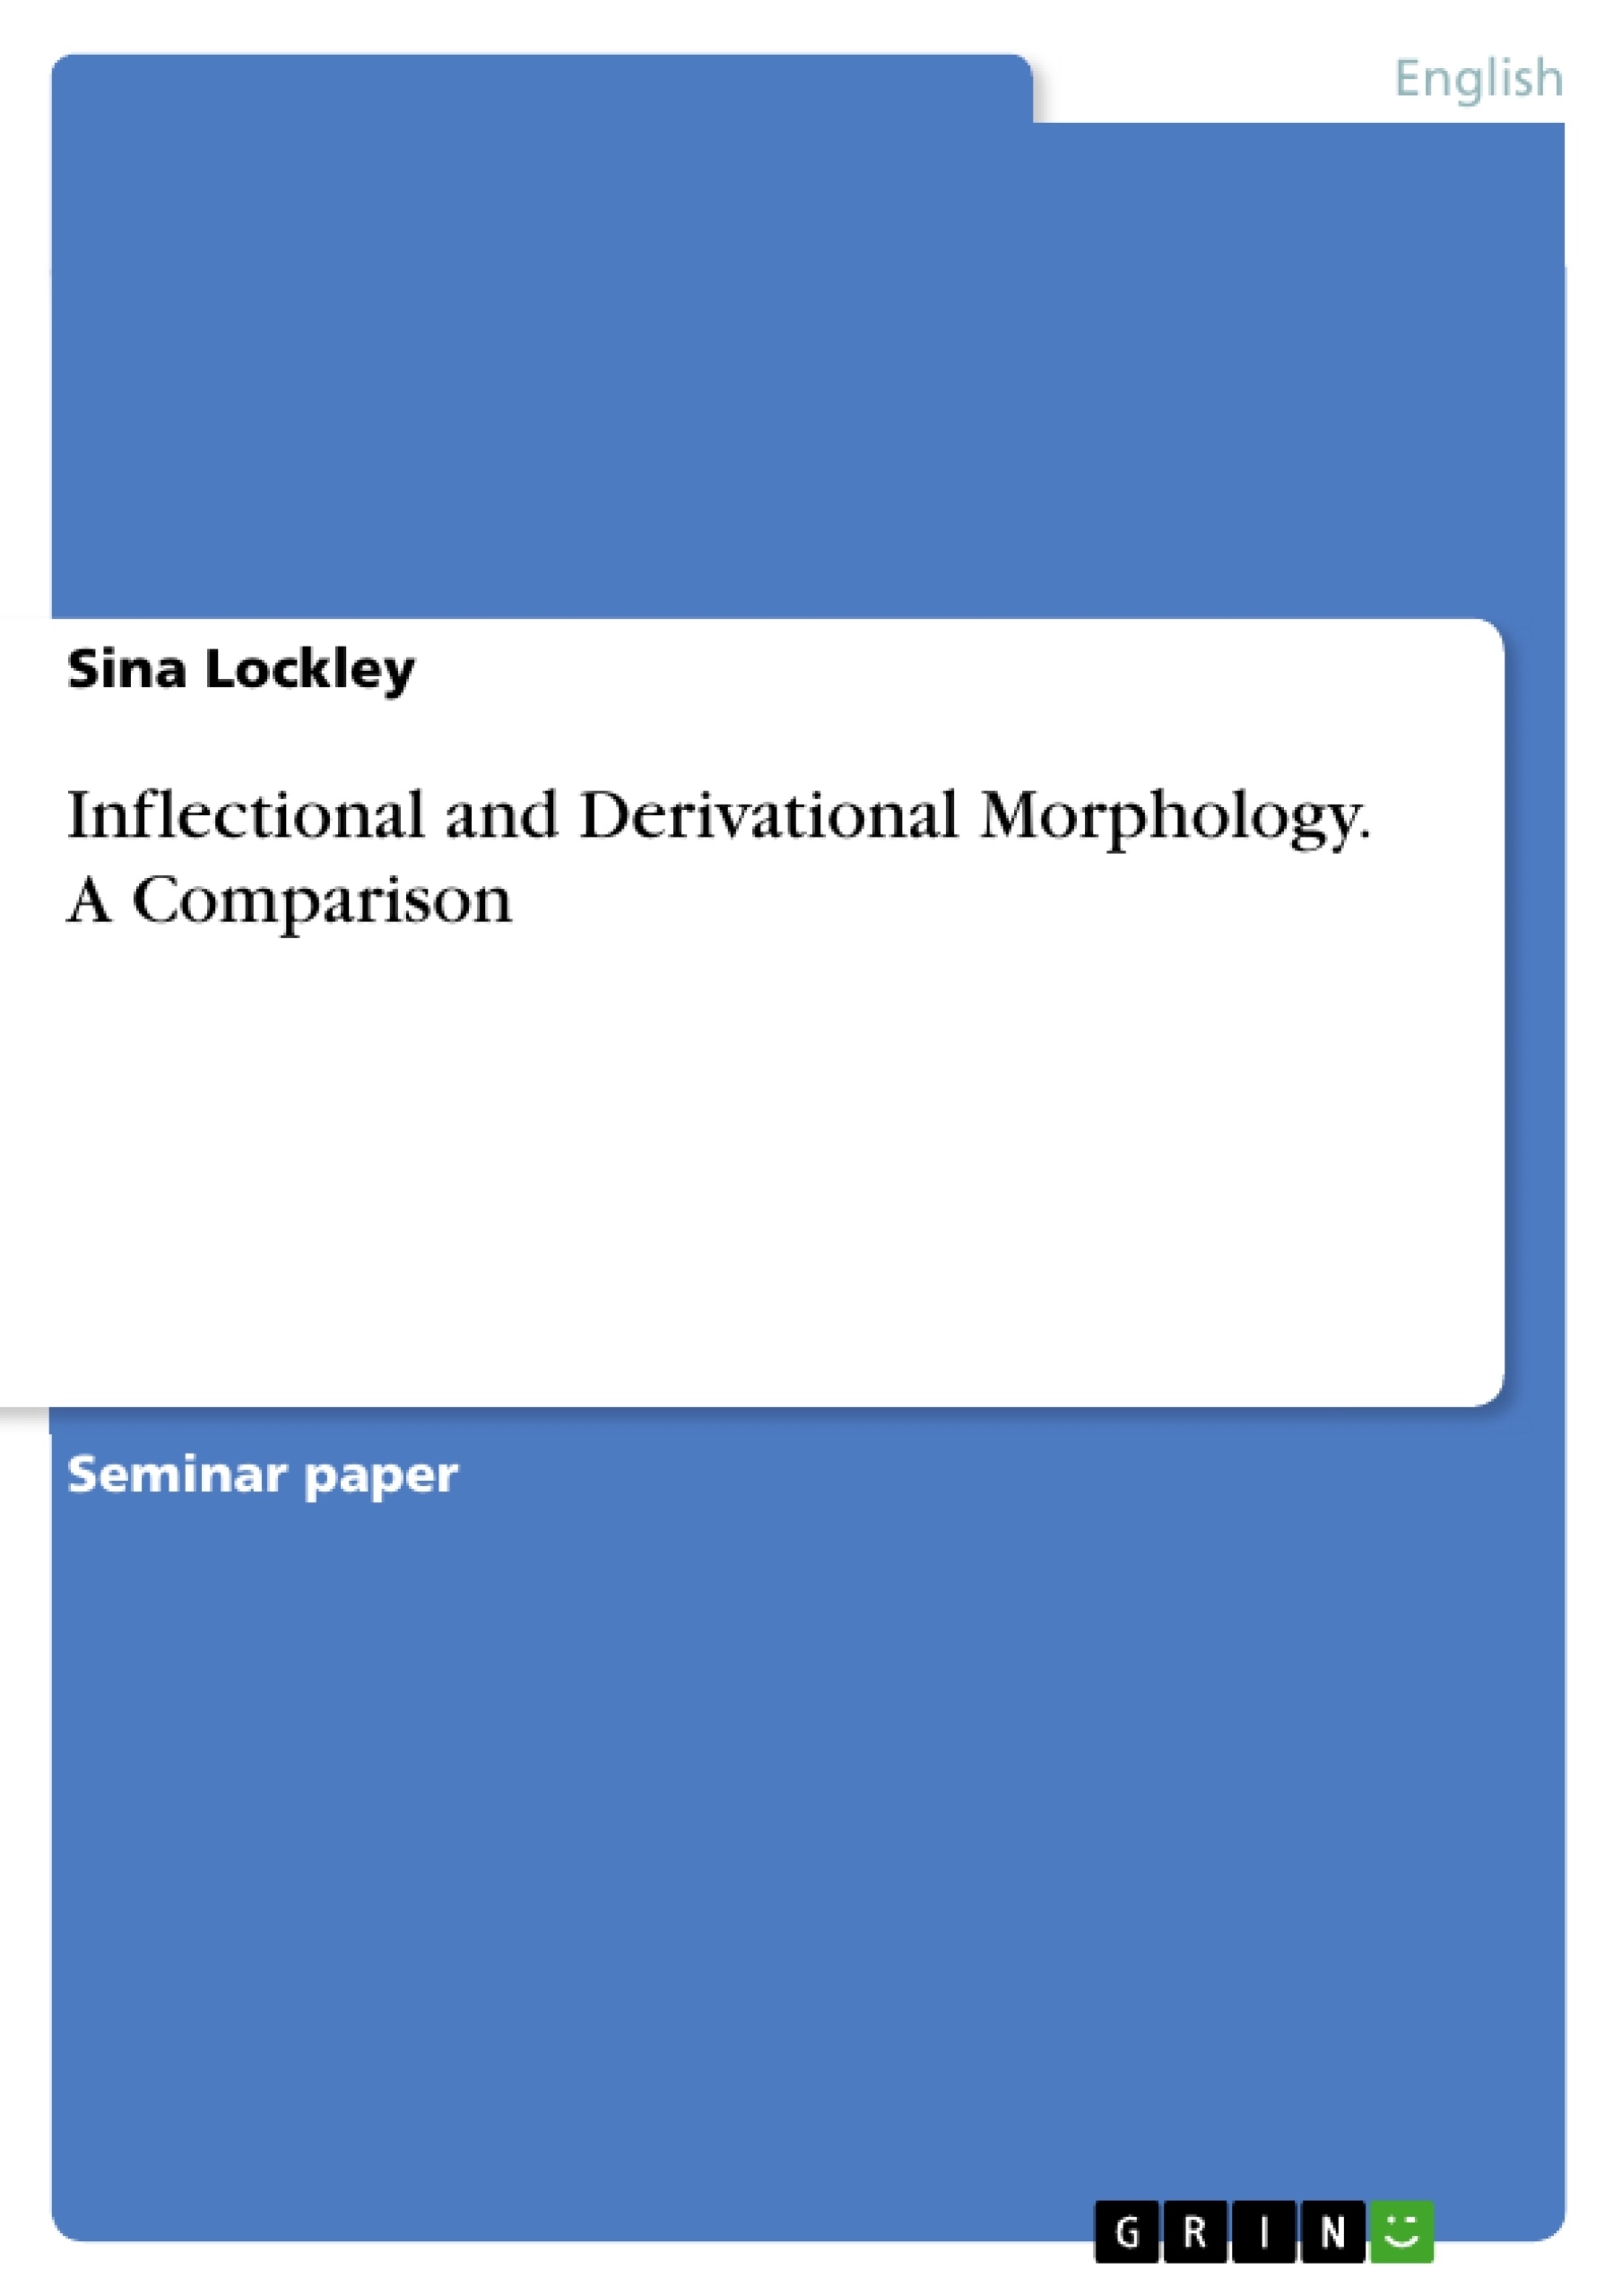 Title: Inflectional and Derivational Morphology. A Comparison